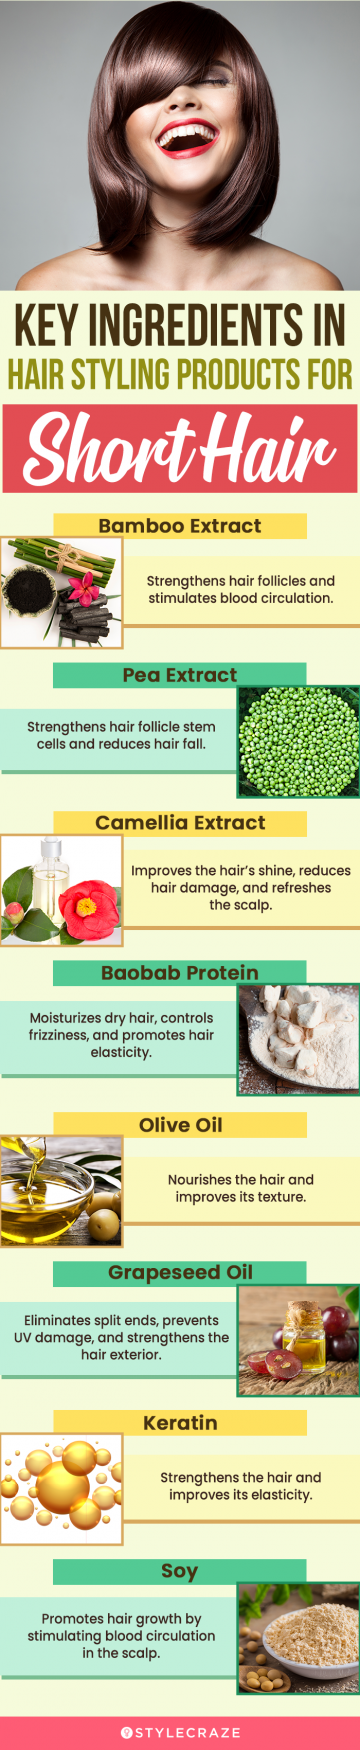 Key Ingredients In Hair Styling Products For Short Hair (infographic)